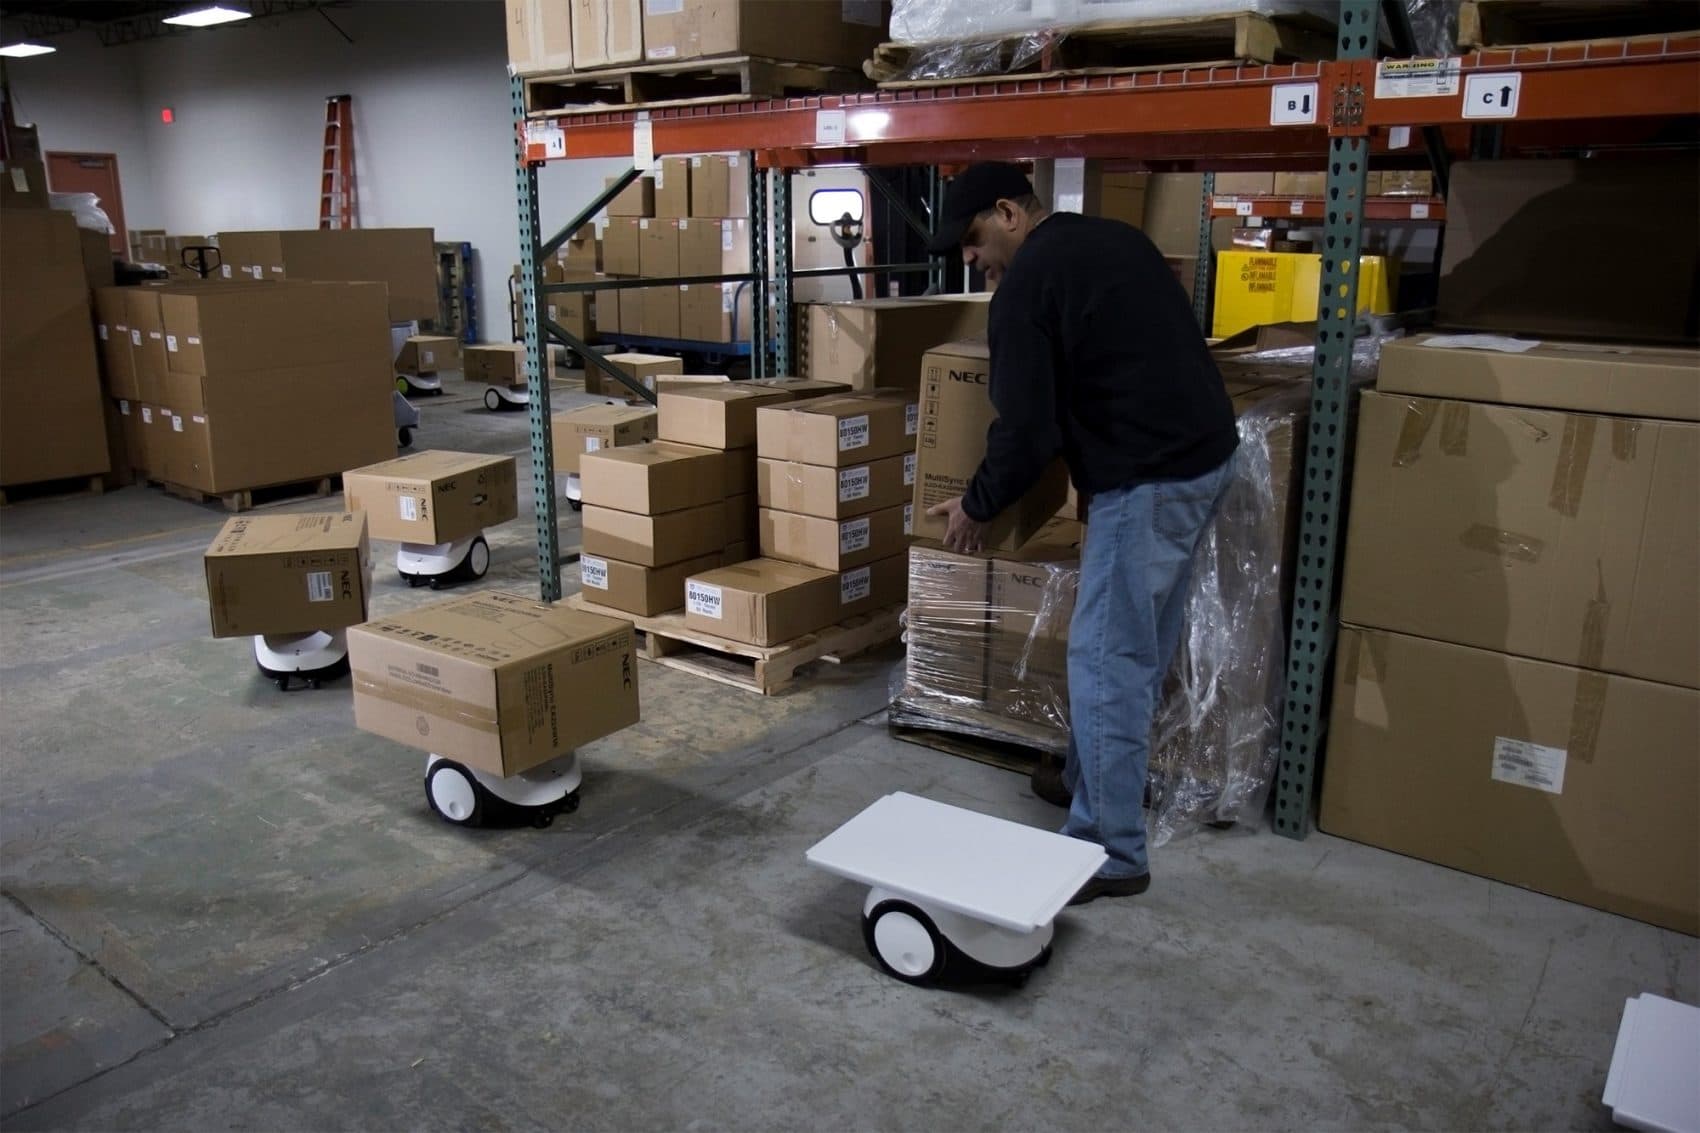 The founder of Vecna says robots are not about replacing people, it's about making warehouse workers as efficient as possible. (Courtesy of Vecna Robotics)